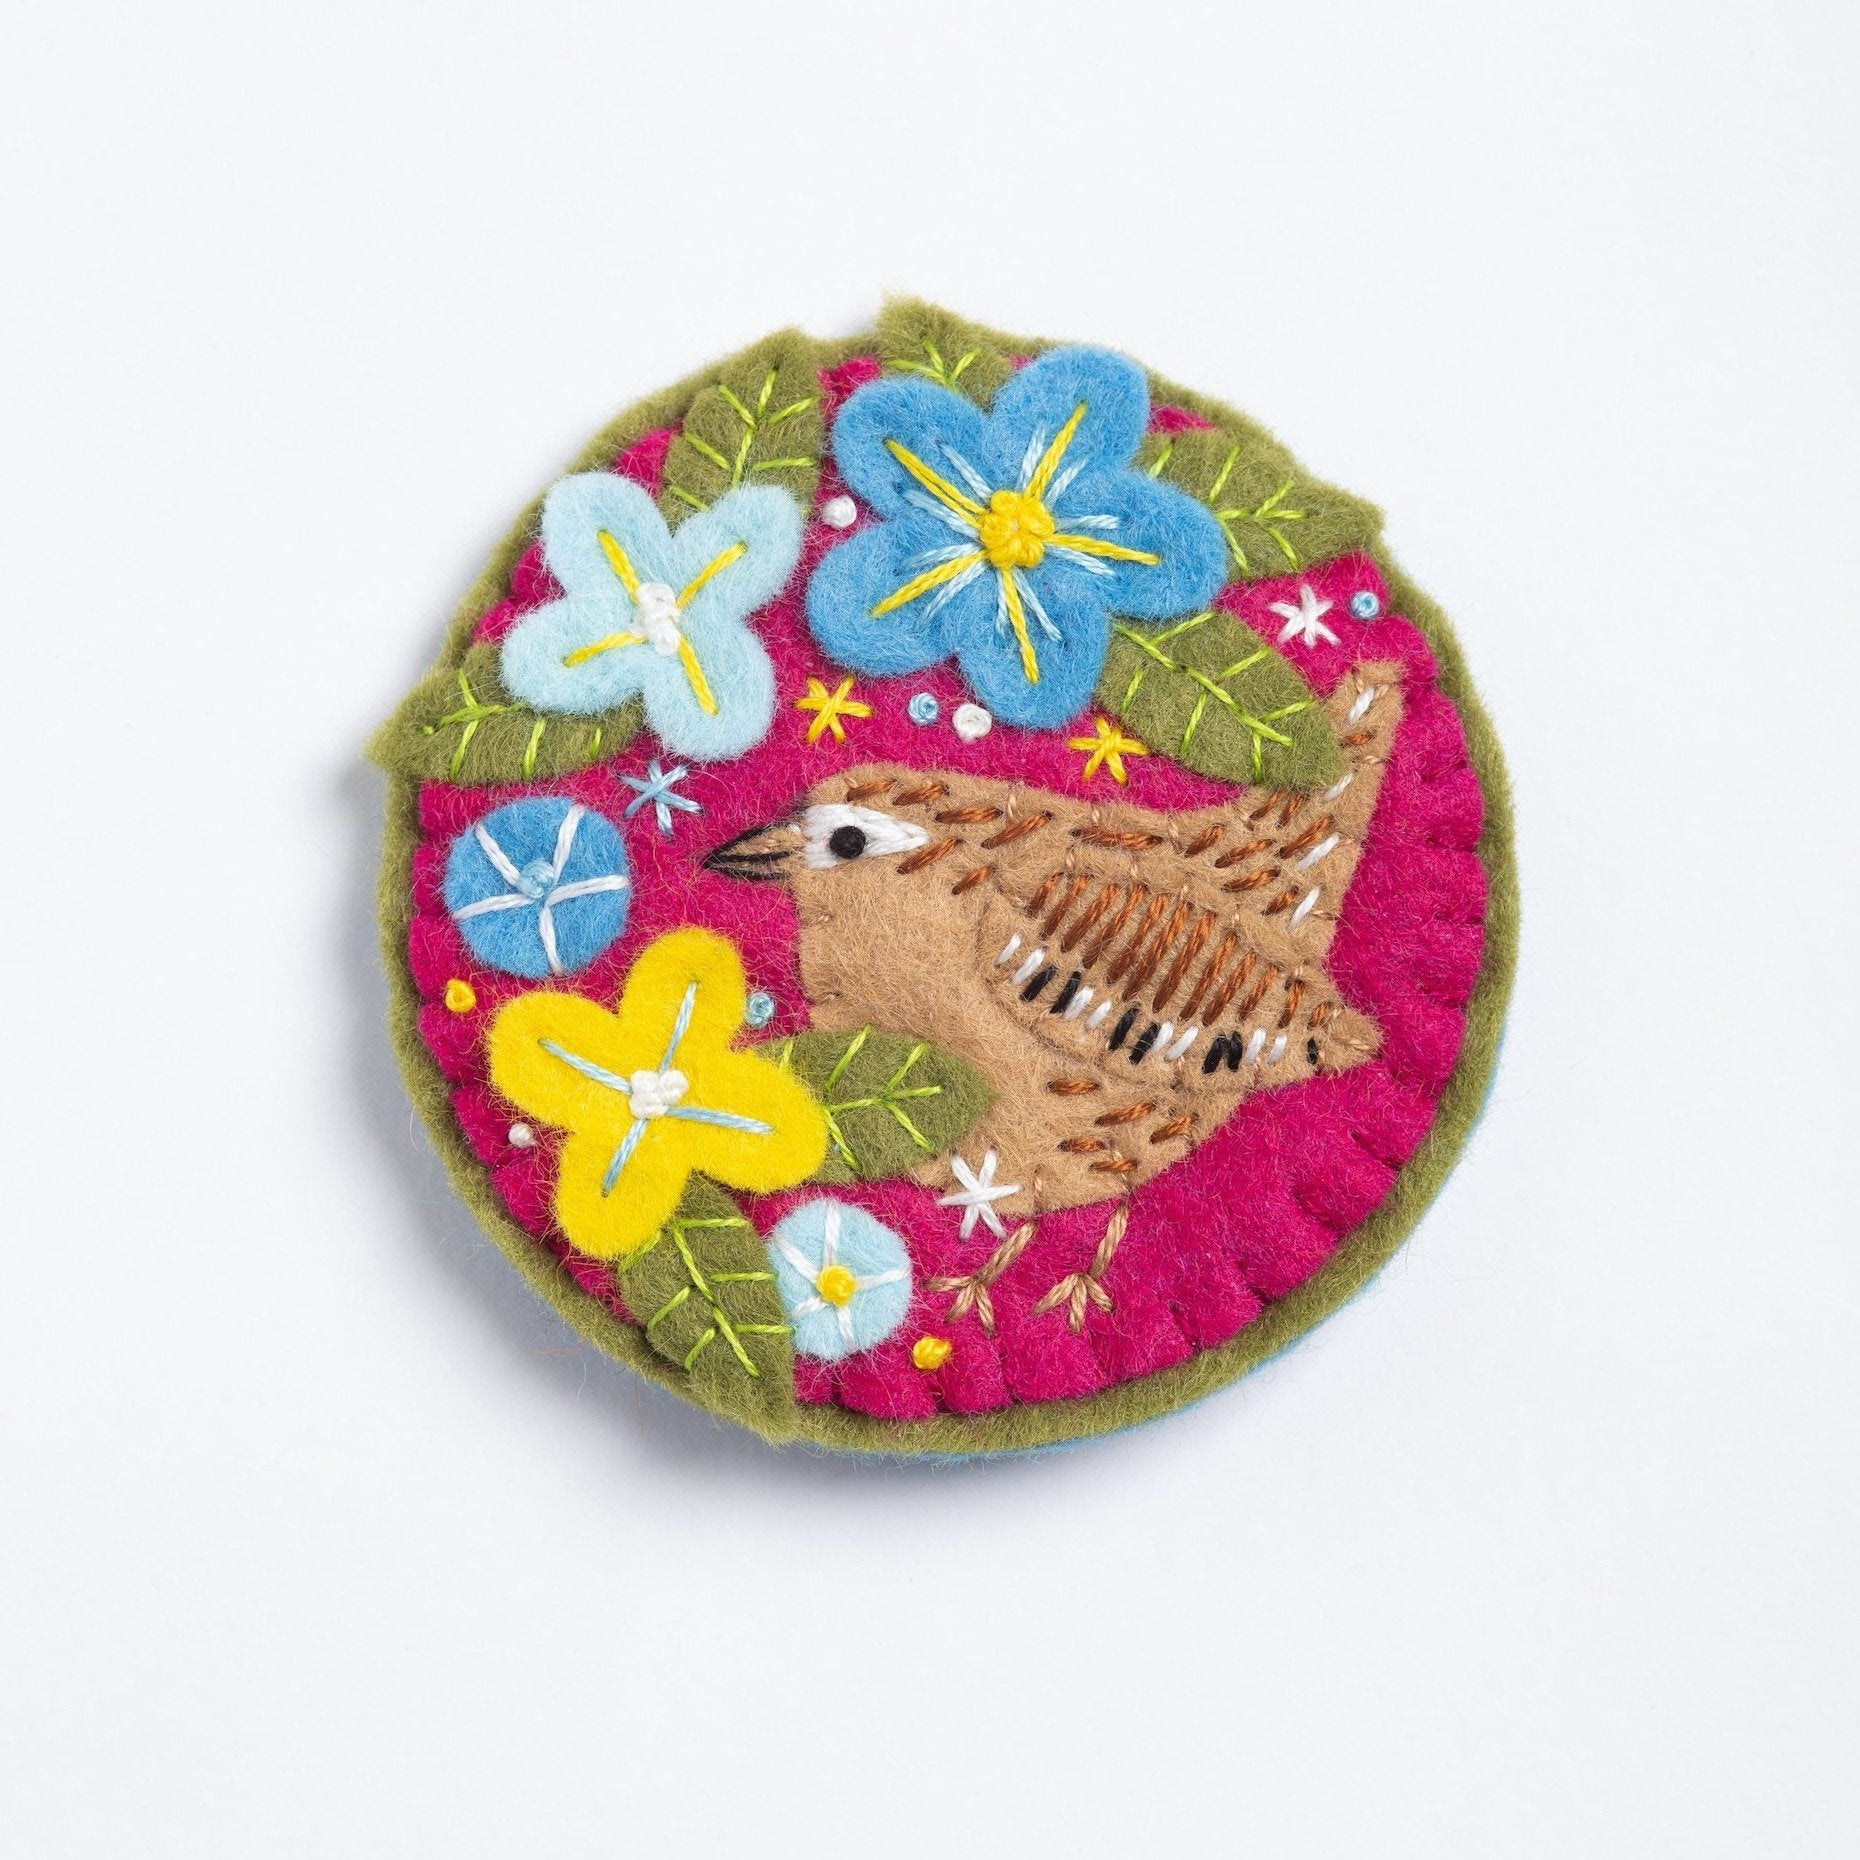 Clipped image of wren brooch on white background.